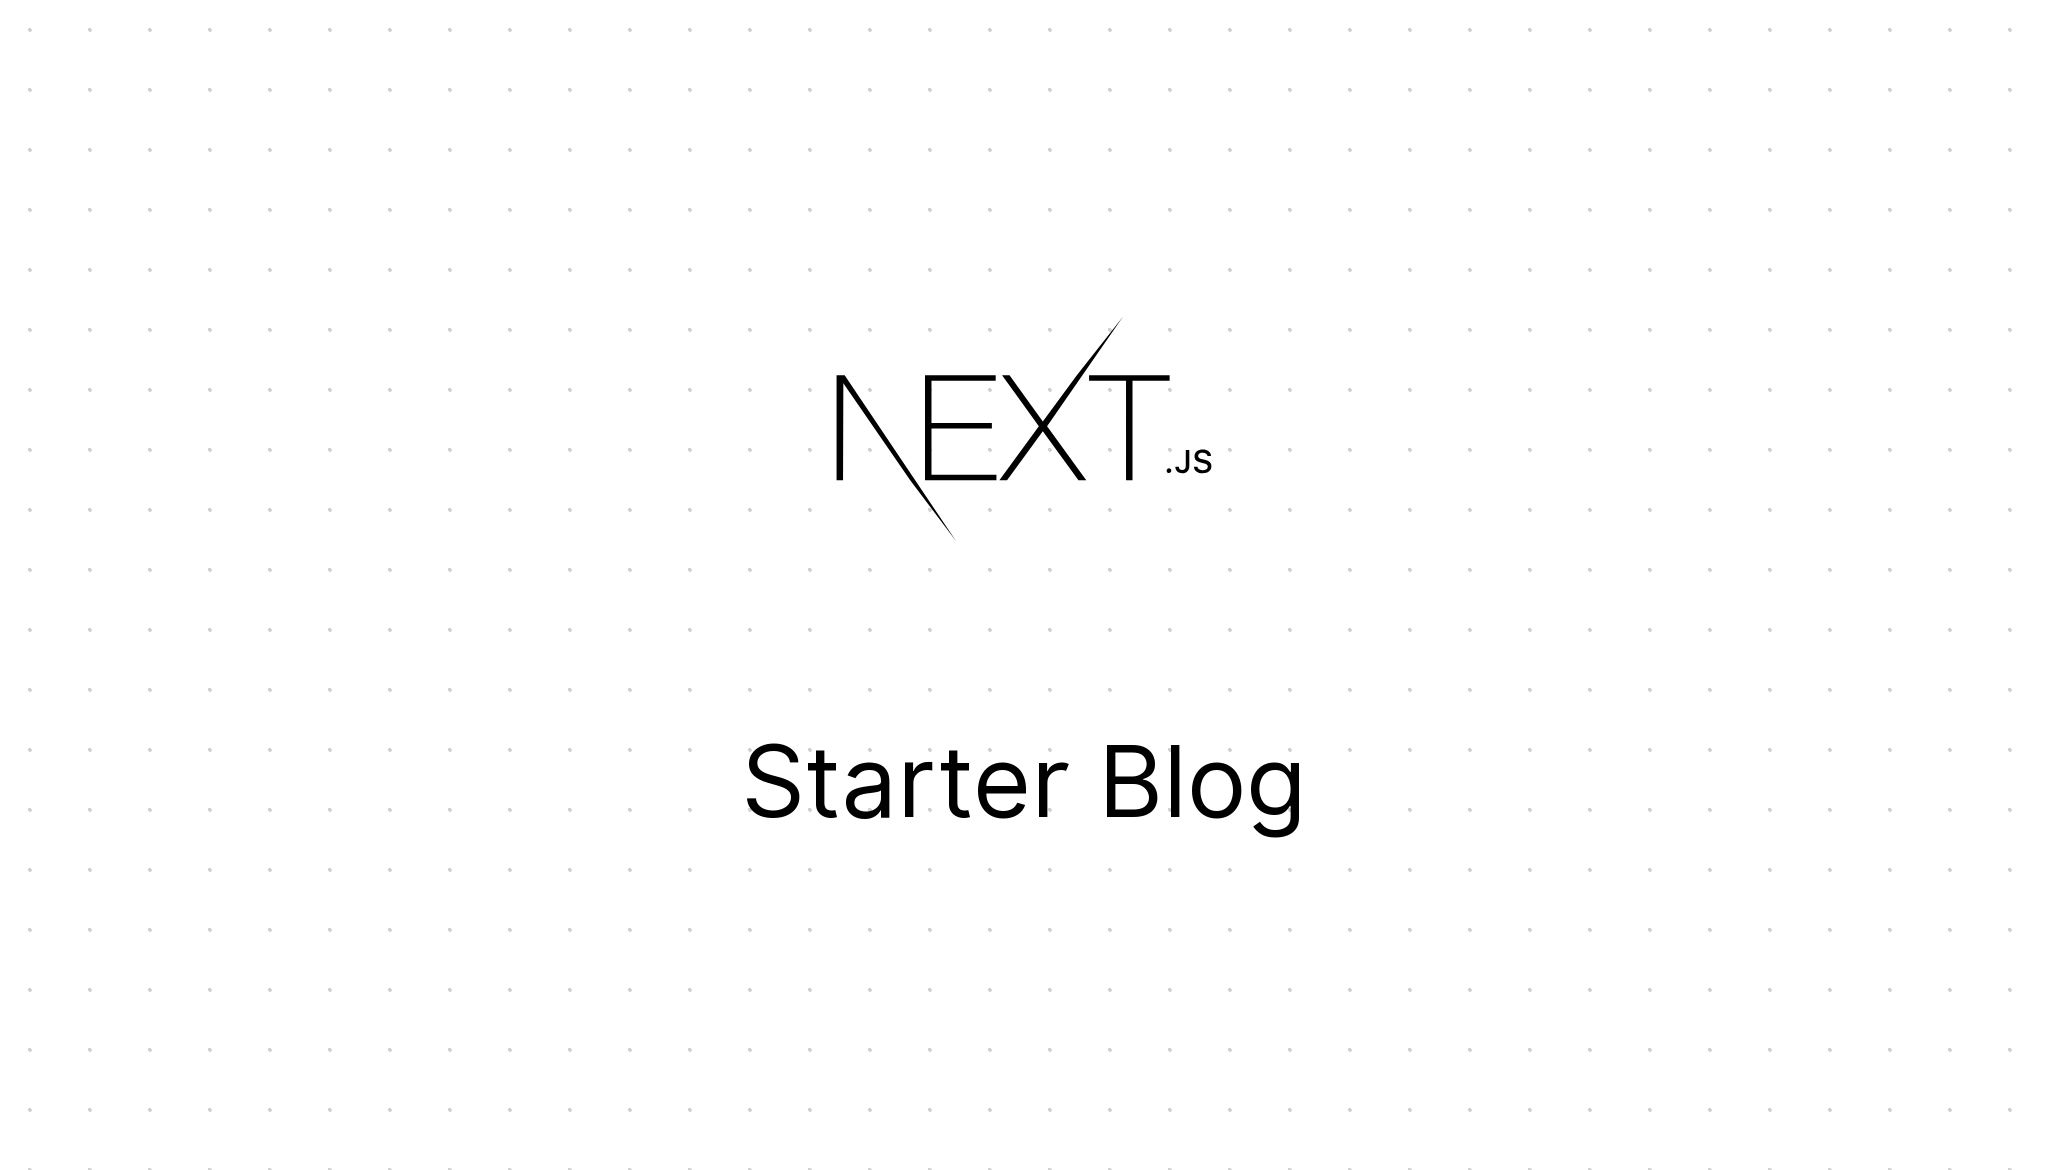 examples/blog-starter/static/site-feature.png